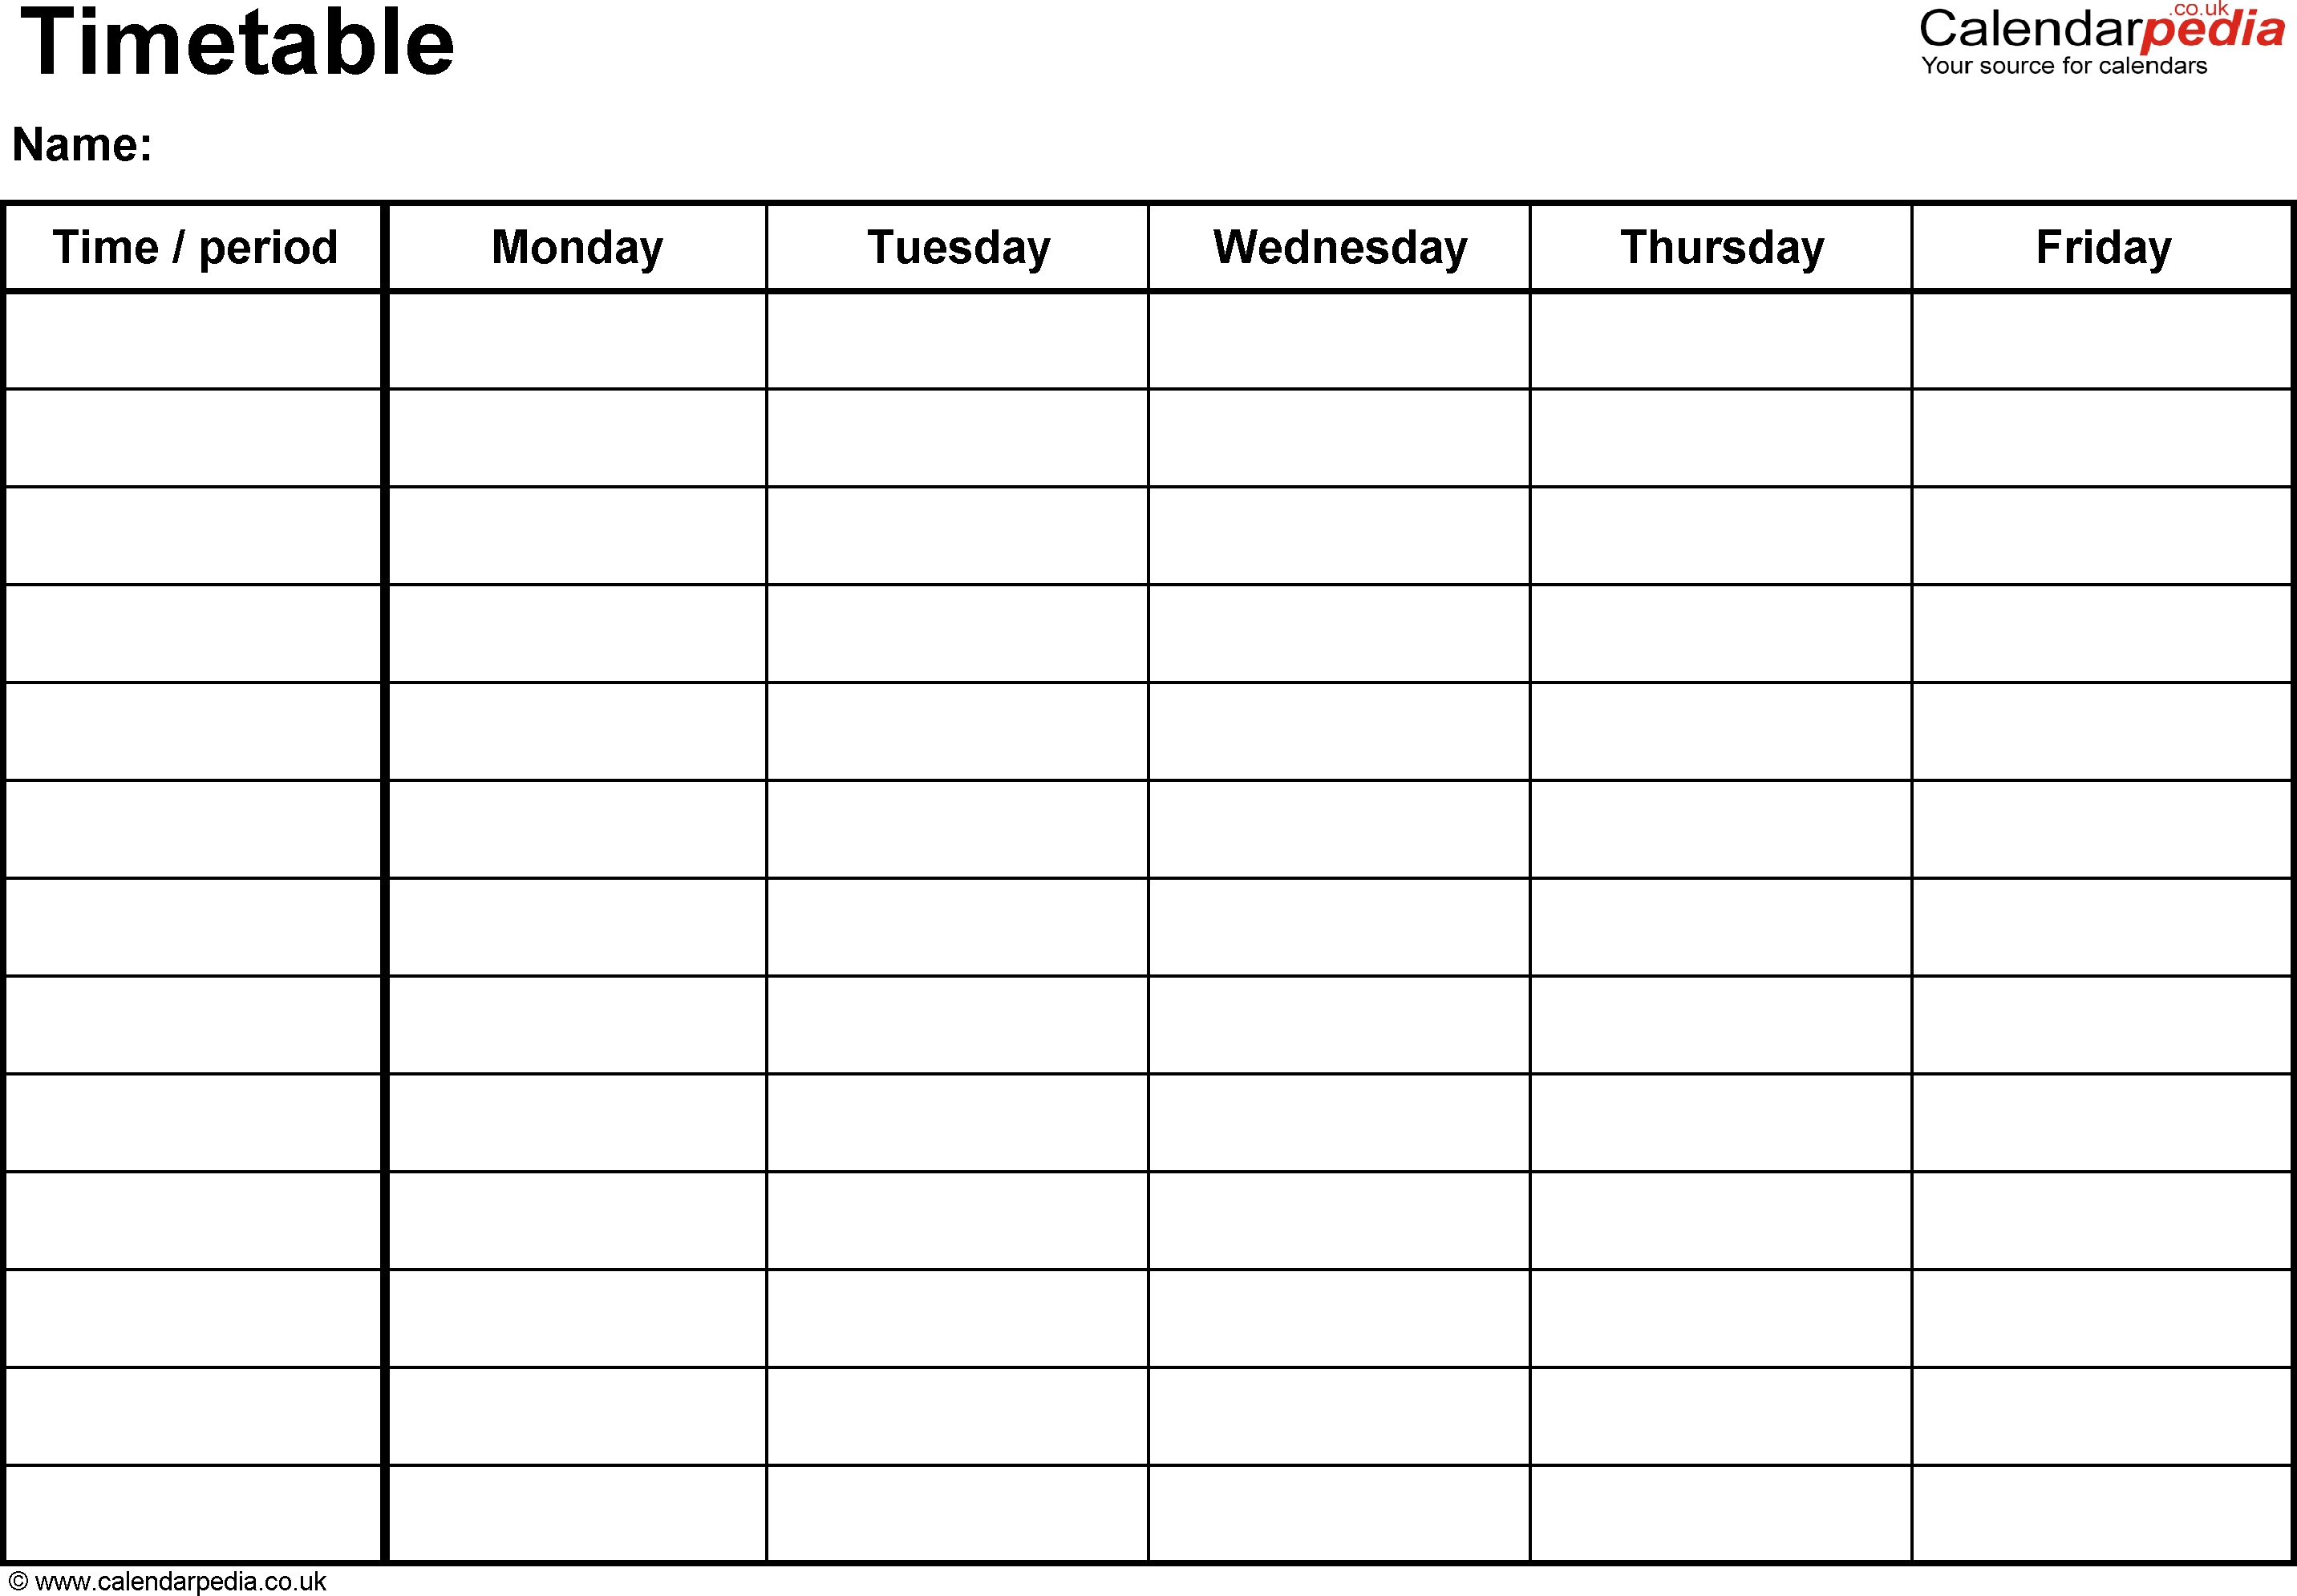 Timetables As Free Printable Templates For Microsoft Word inside Free Printable 5 Day Calendar Pages